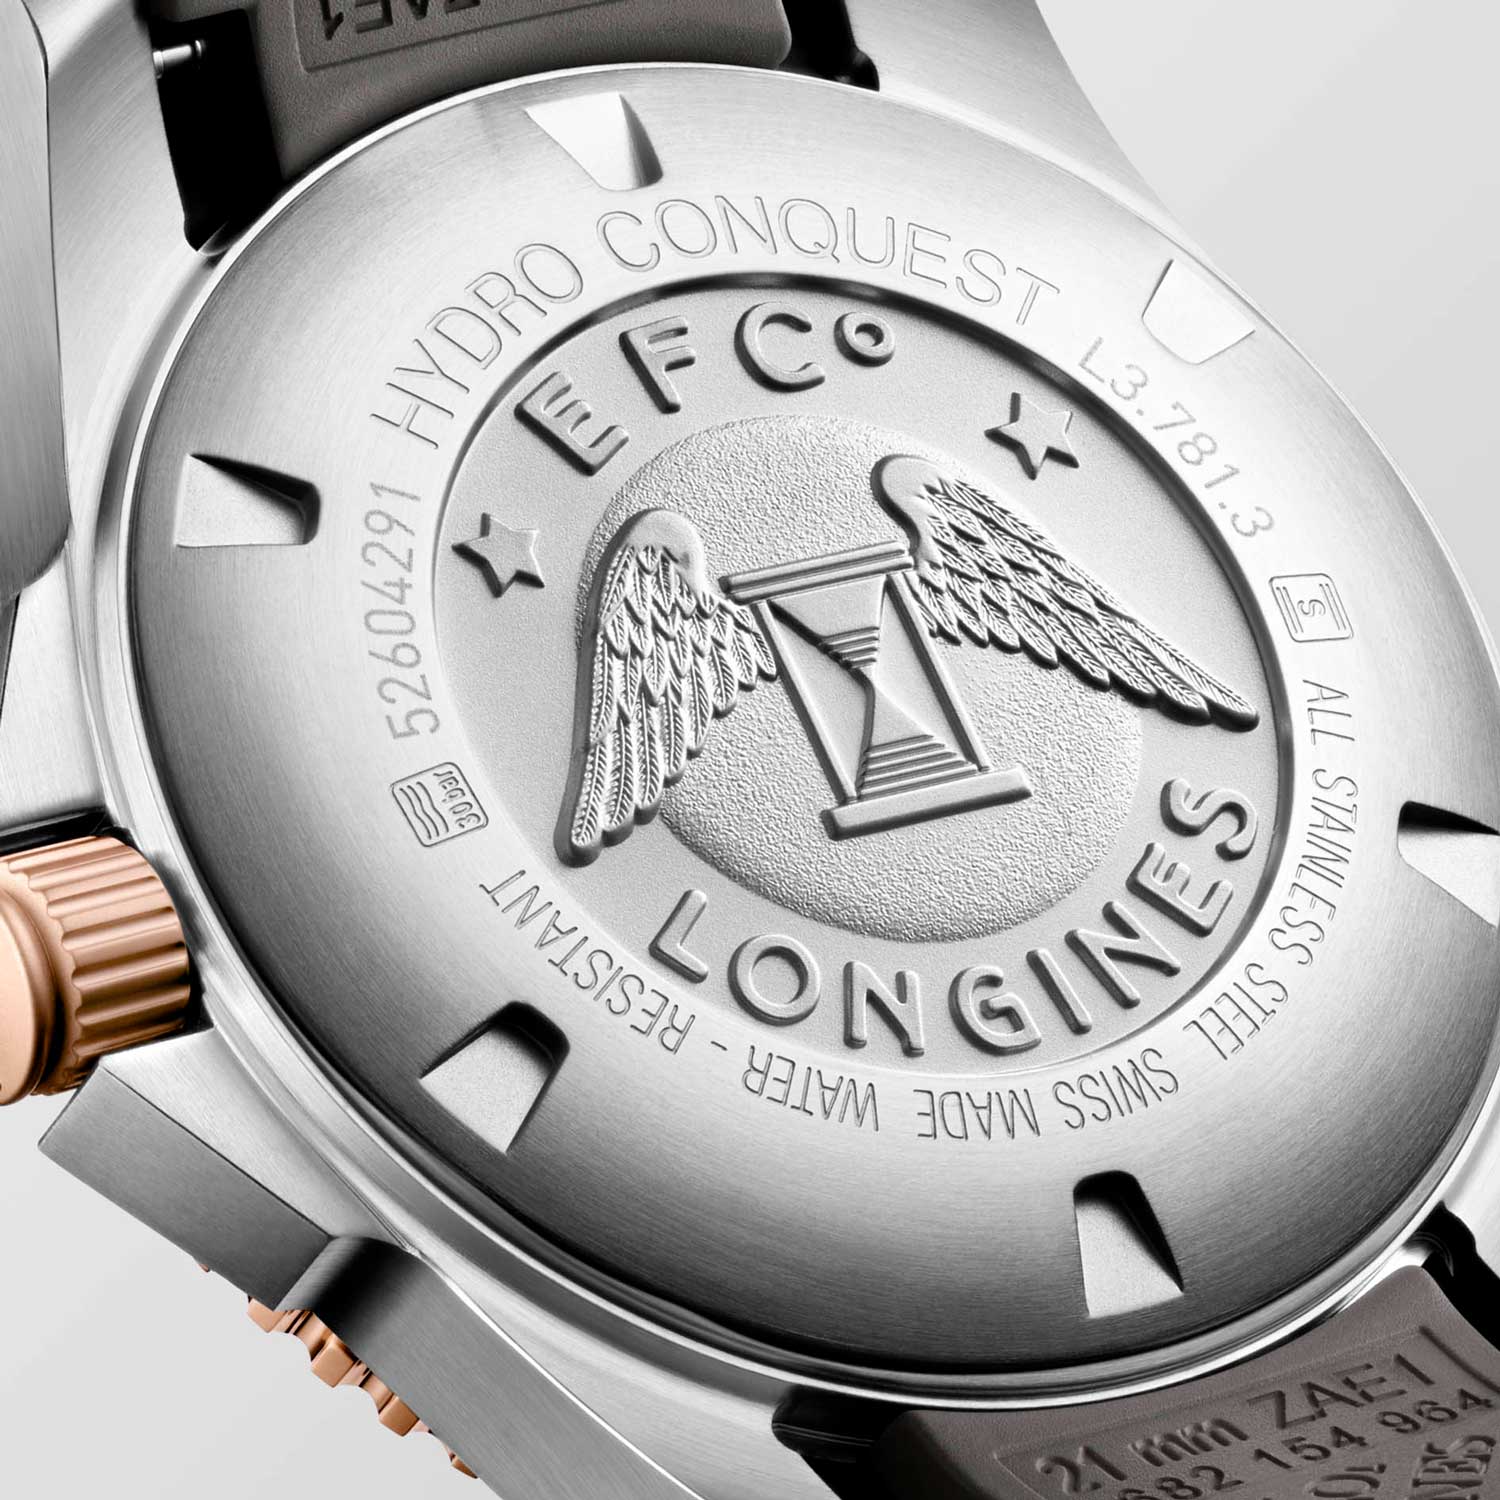 The 41 mm watch is equipped with a self-winding mechanical movement, calibre L888.5, exclusively made for Longines.